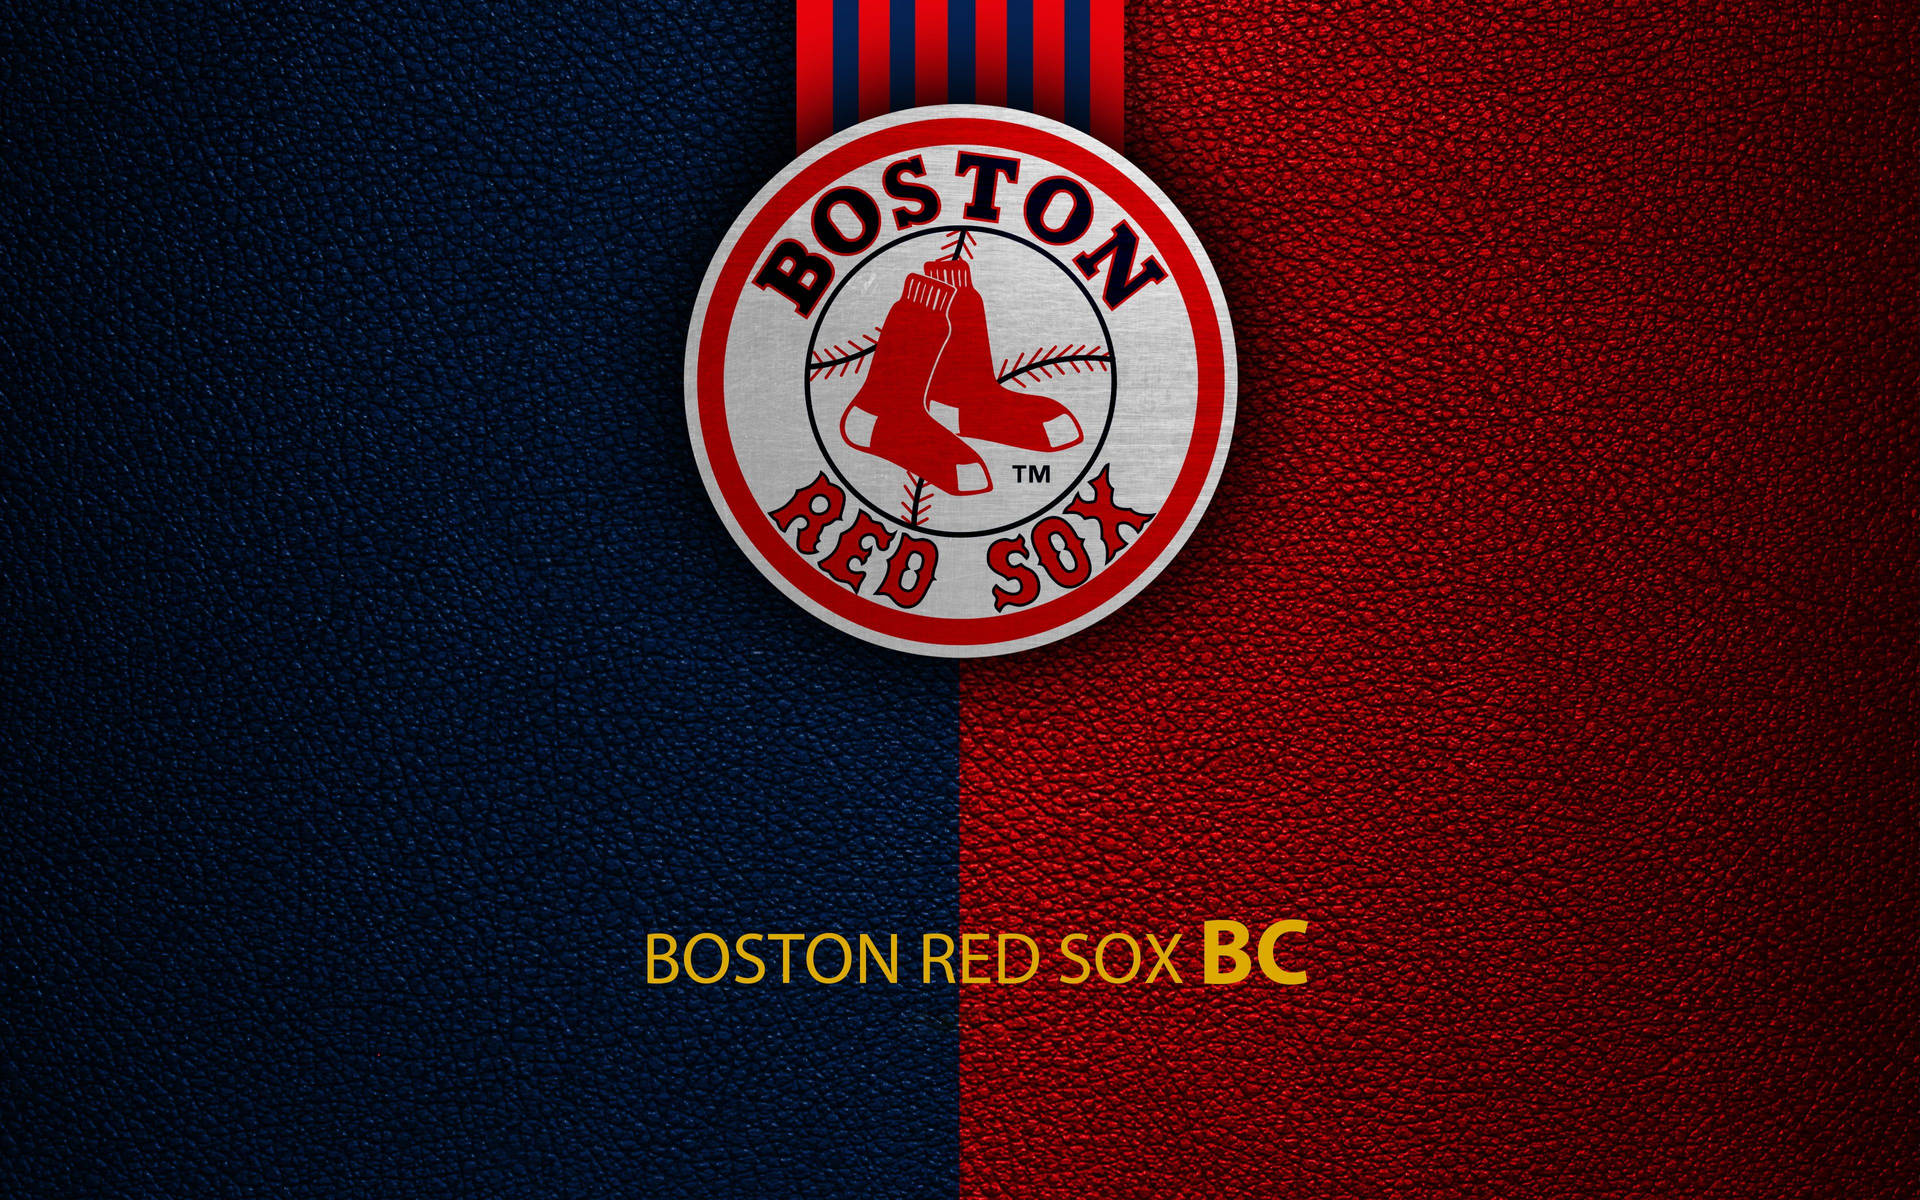 Boston Red Sox Bc Background